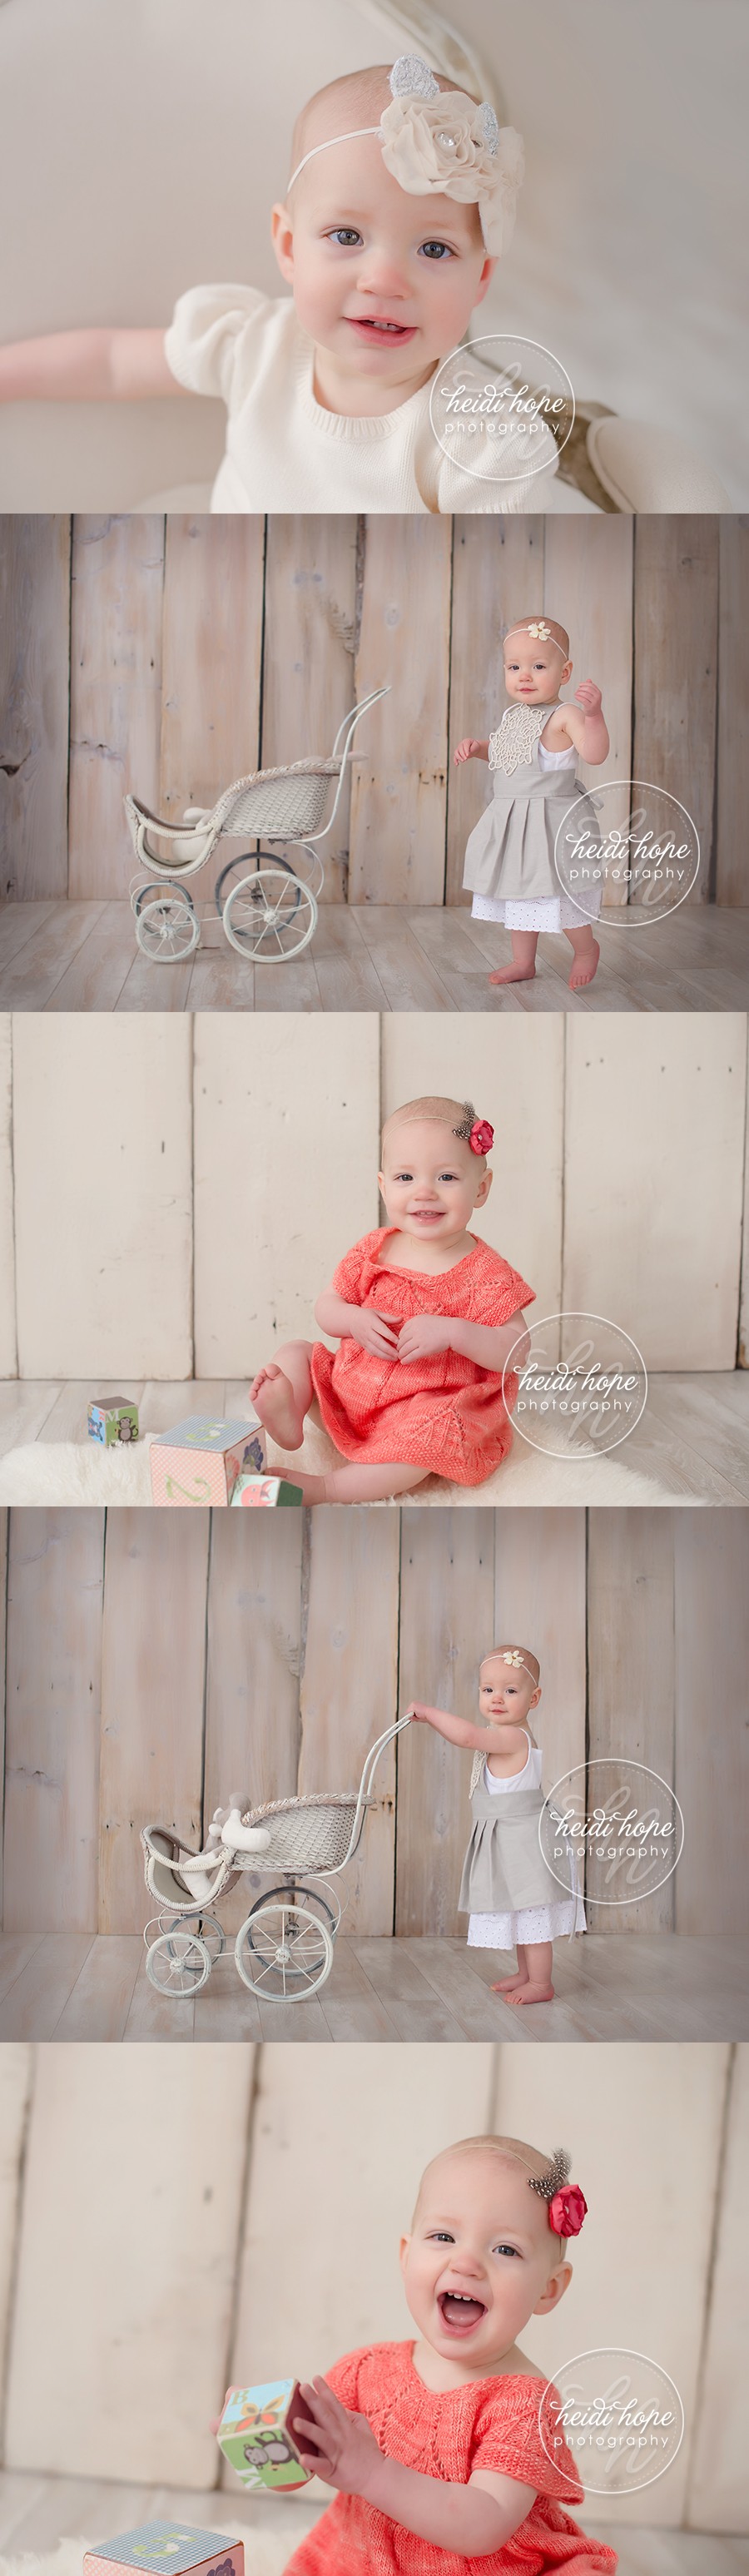 1 year old little star studio session and simple baby portraits